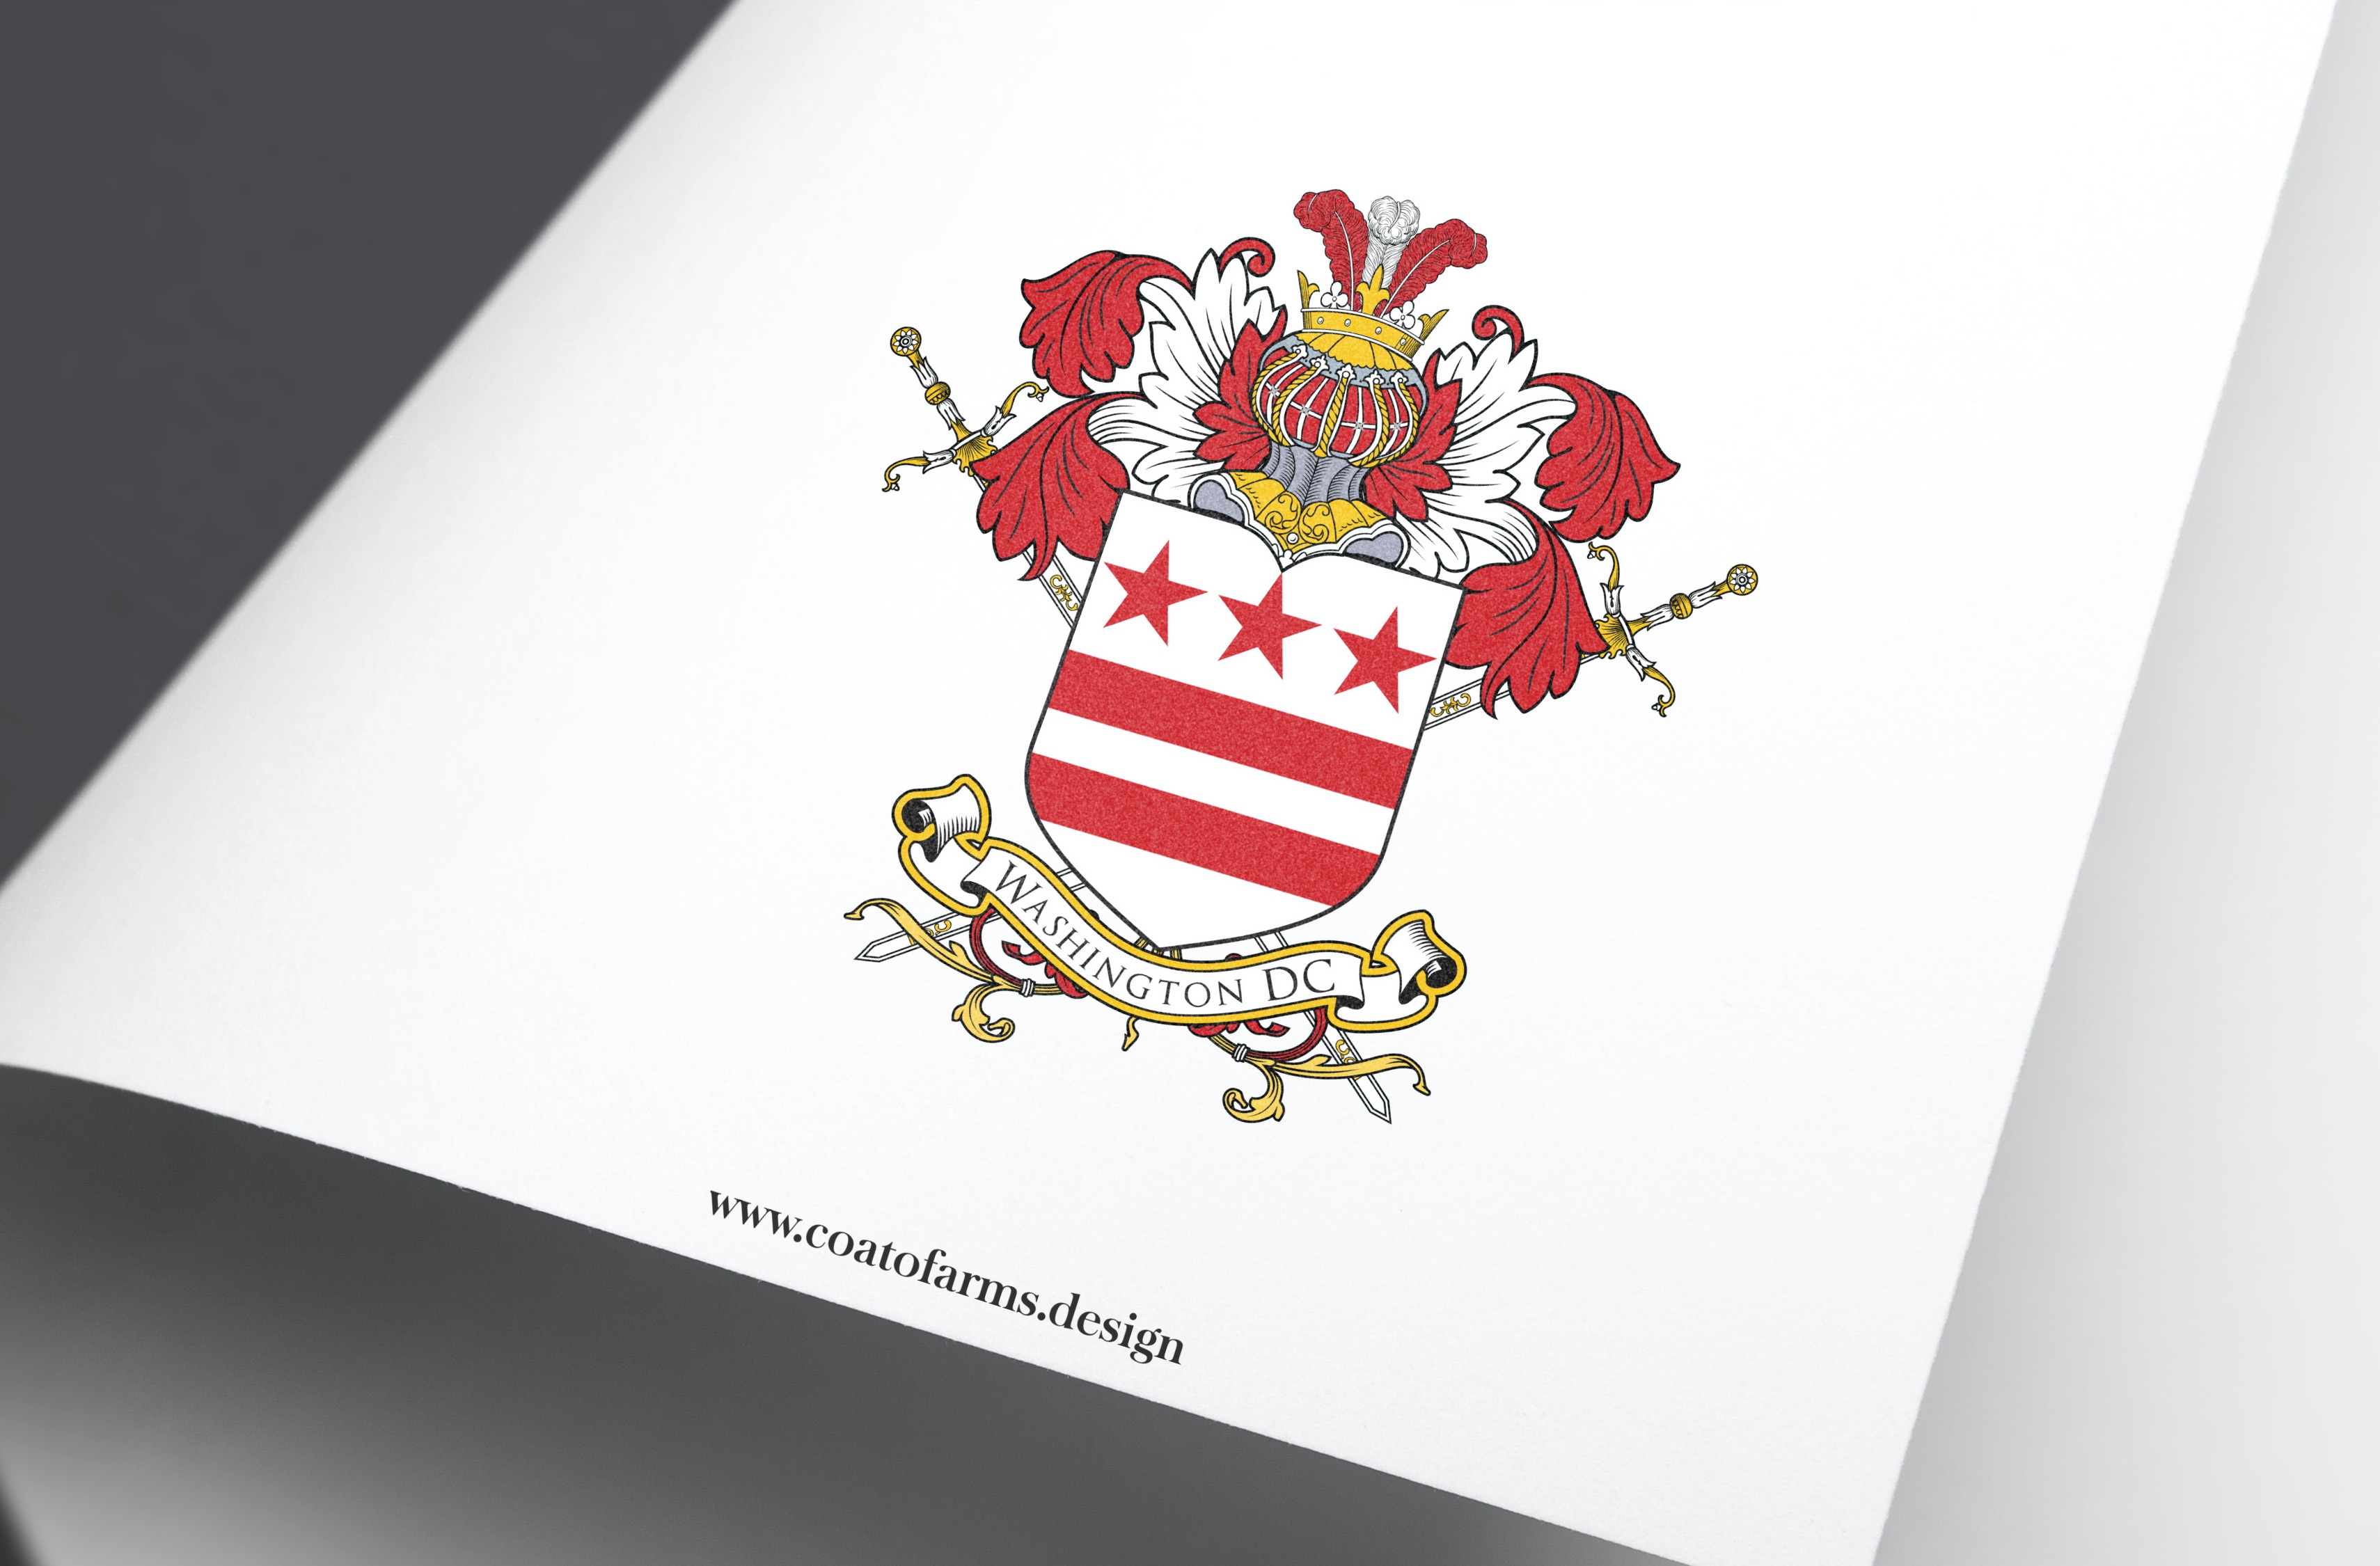 Coat of arms (emblem) I designed for a company from the USA, Washington DC